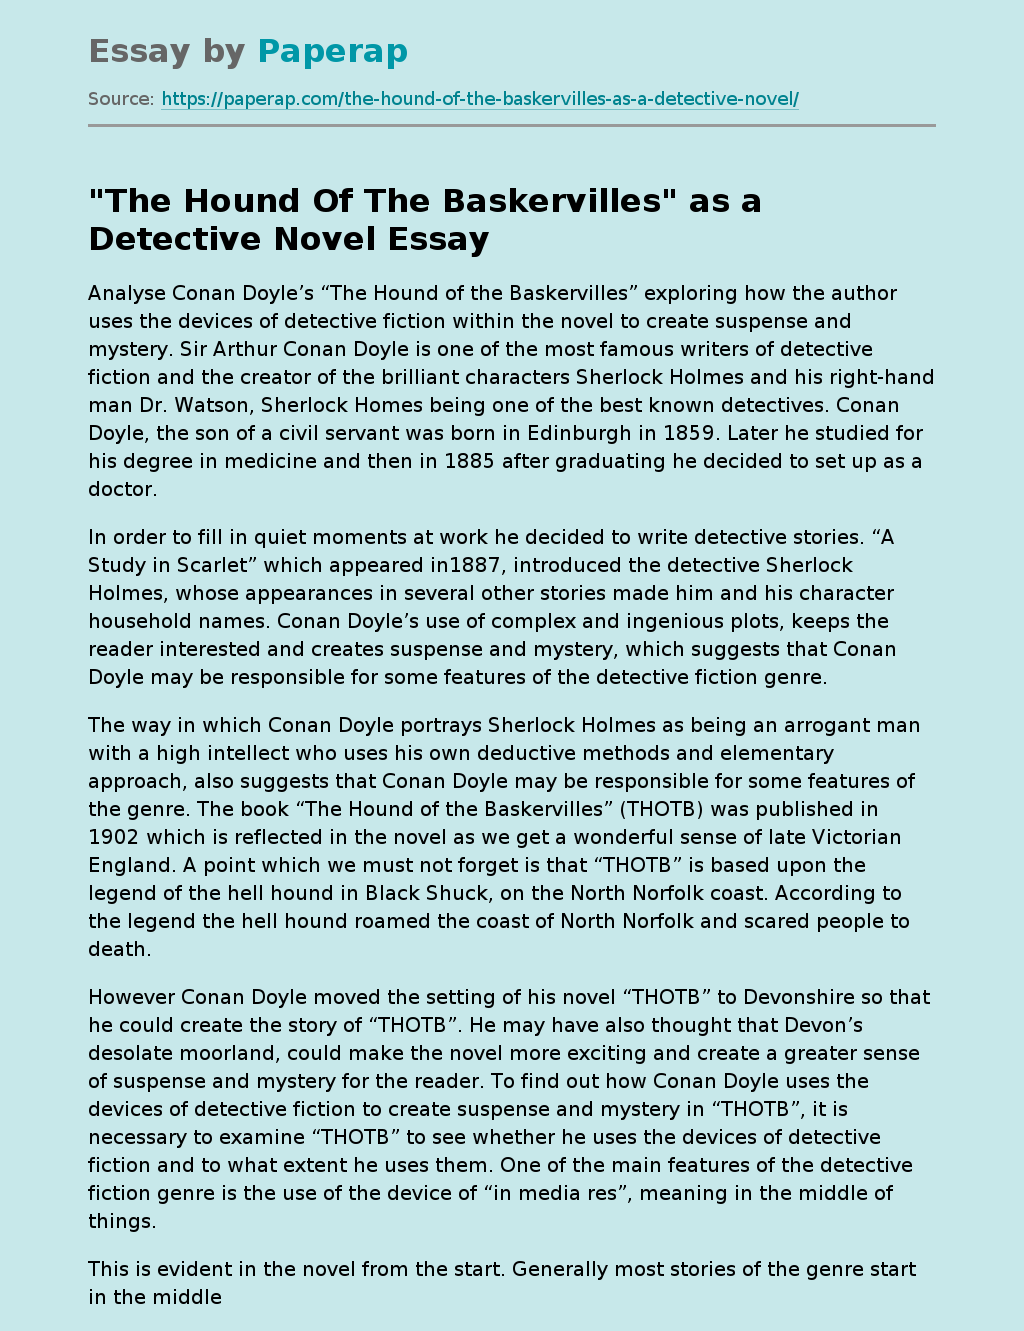 "The Hound Of The Baskervilles" as a Detective Novel